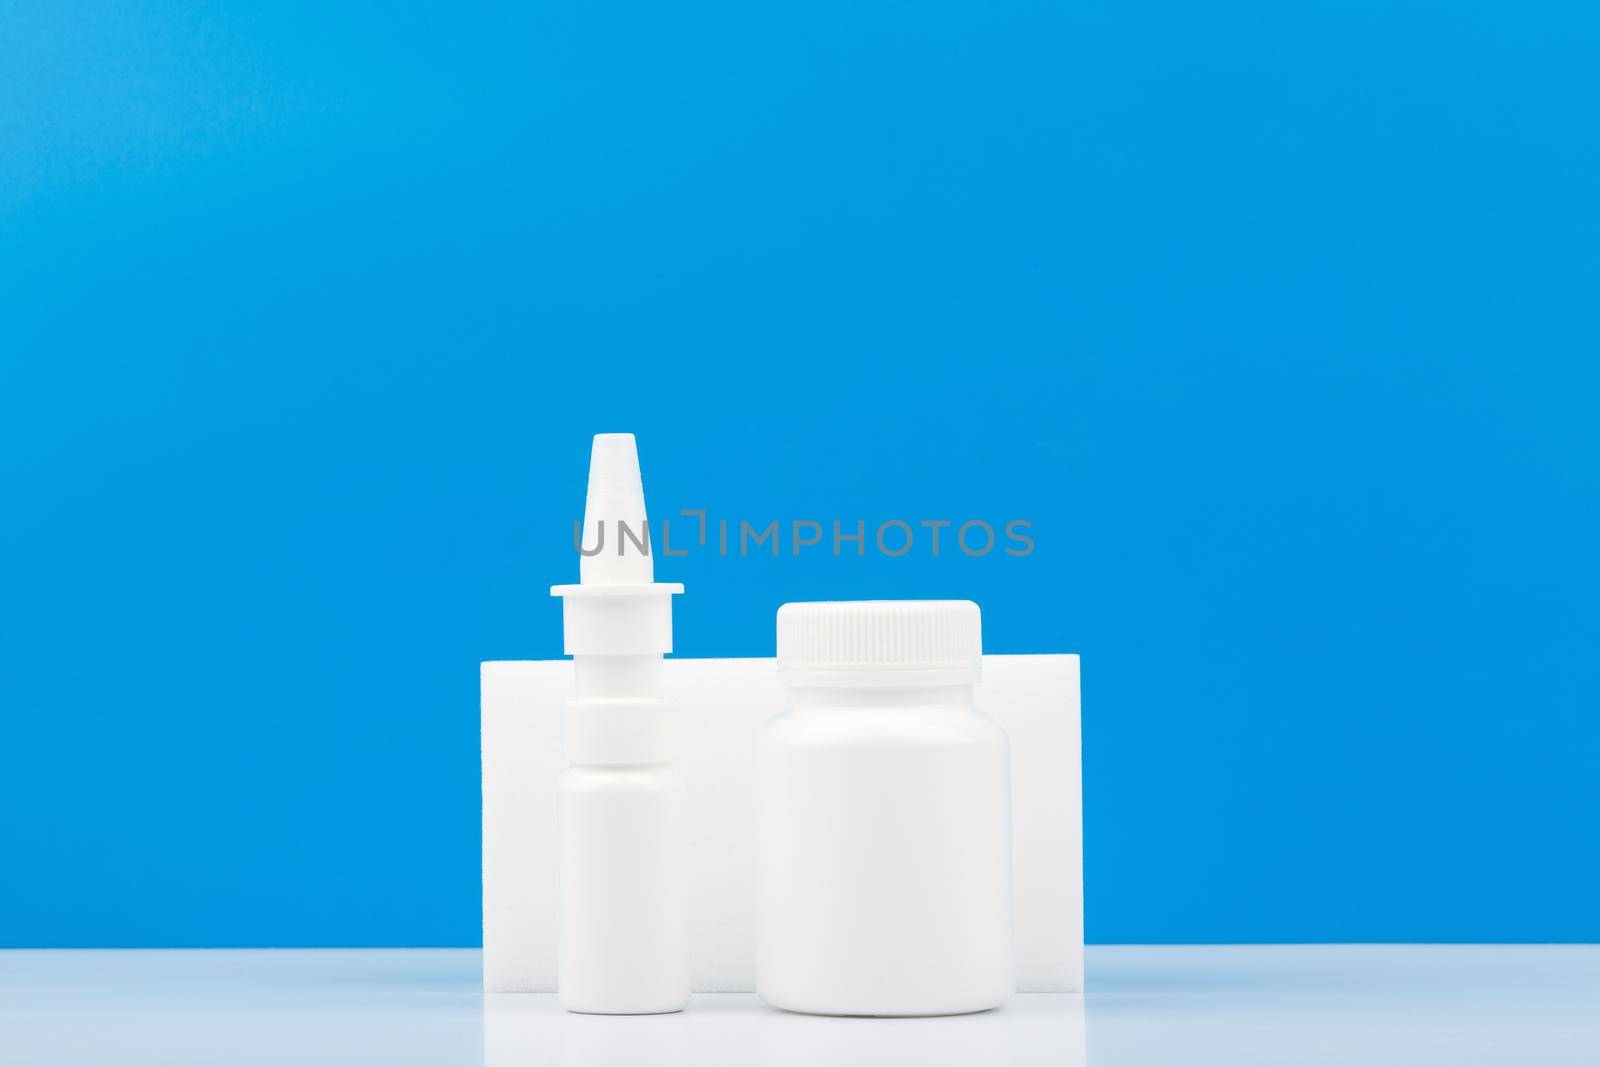 Nose spray and medication bottle on white table against blue background with copy space. Concept of pharmacy and medication treatment during flu and running nose